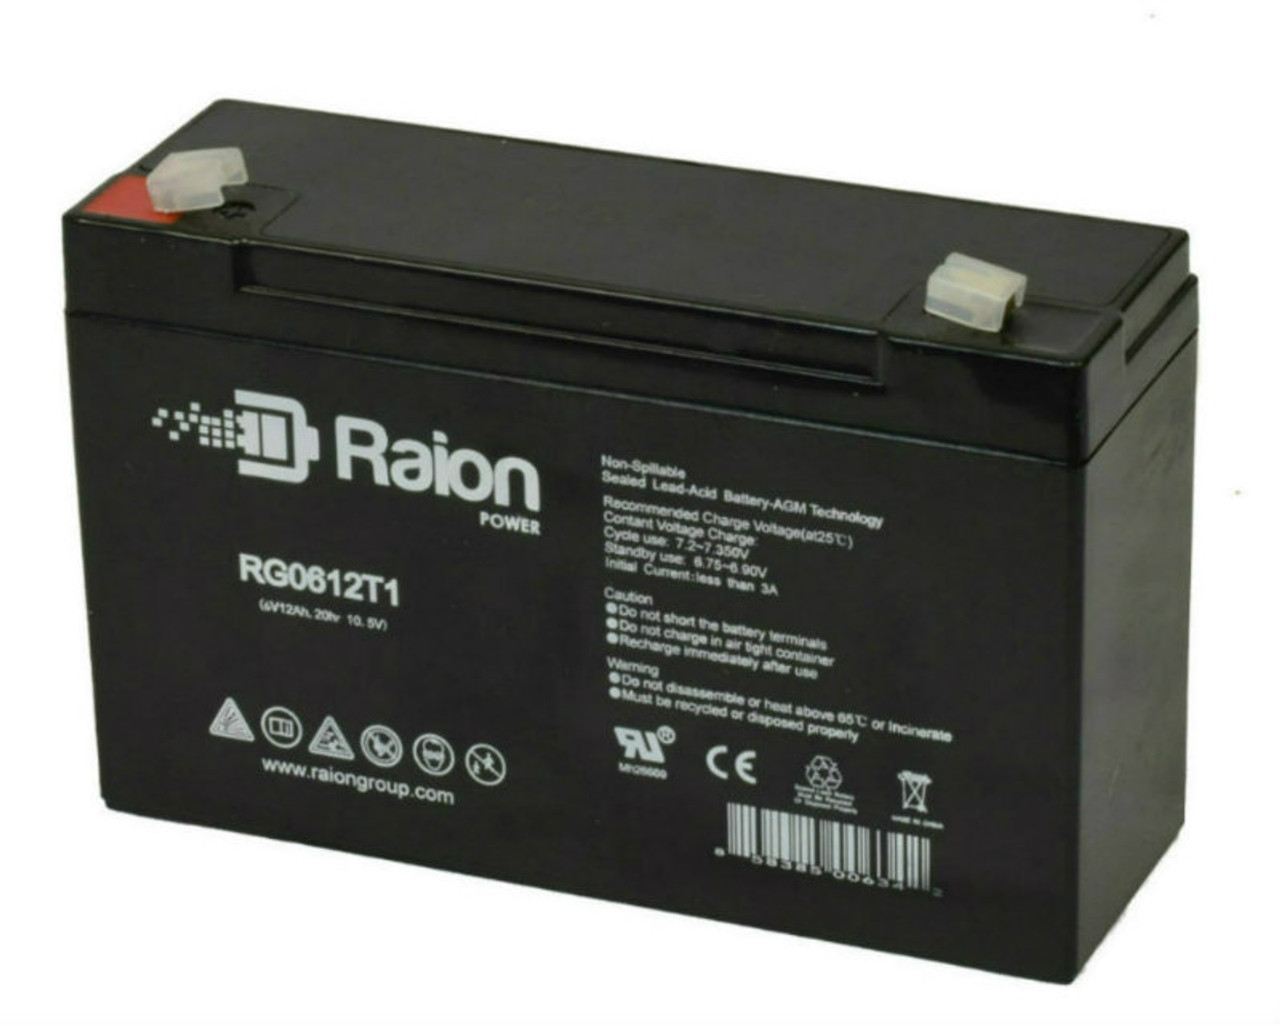 Raion Power RG06120T1 Replacement 6V 12Ah Emergency Light Battery for Holophane M16